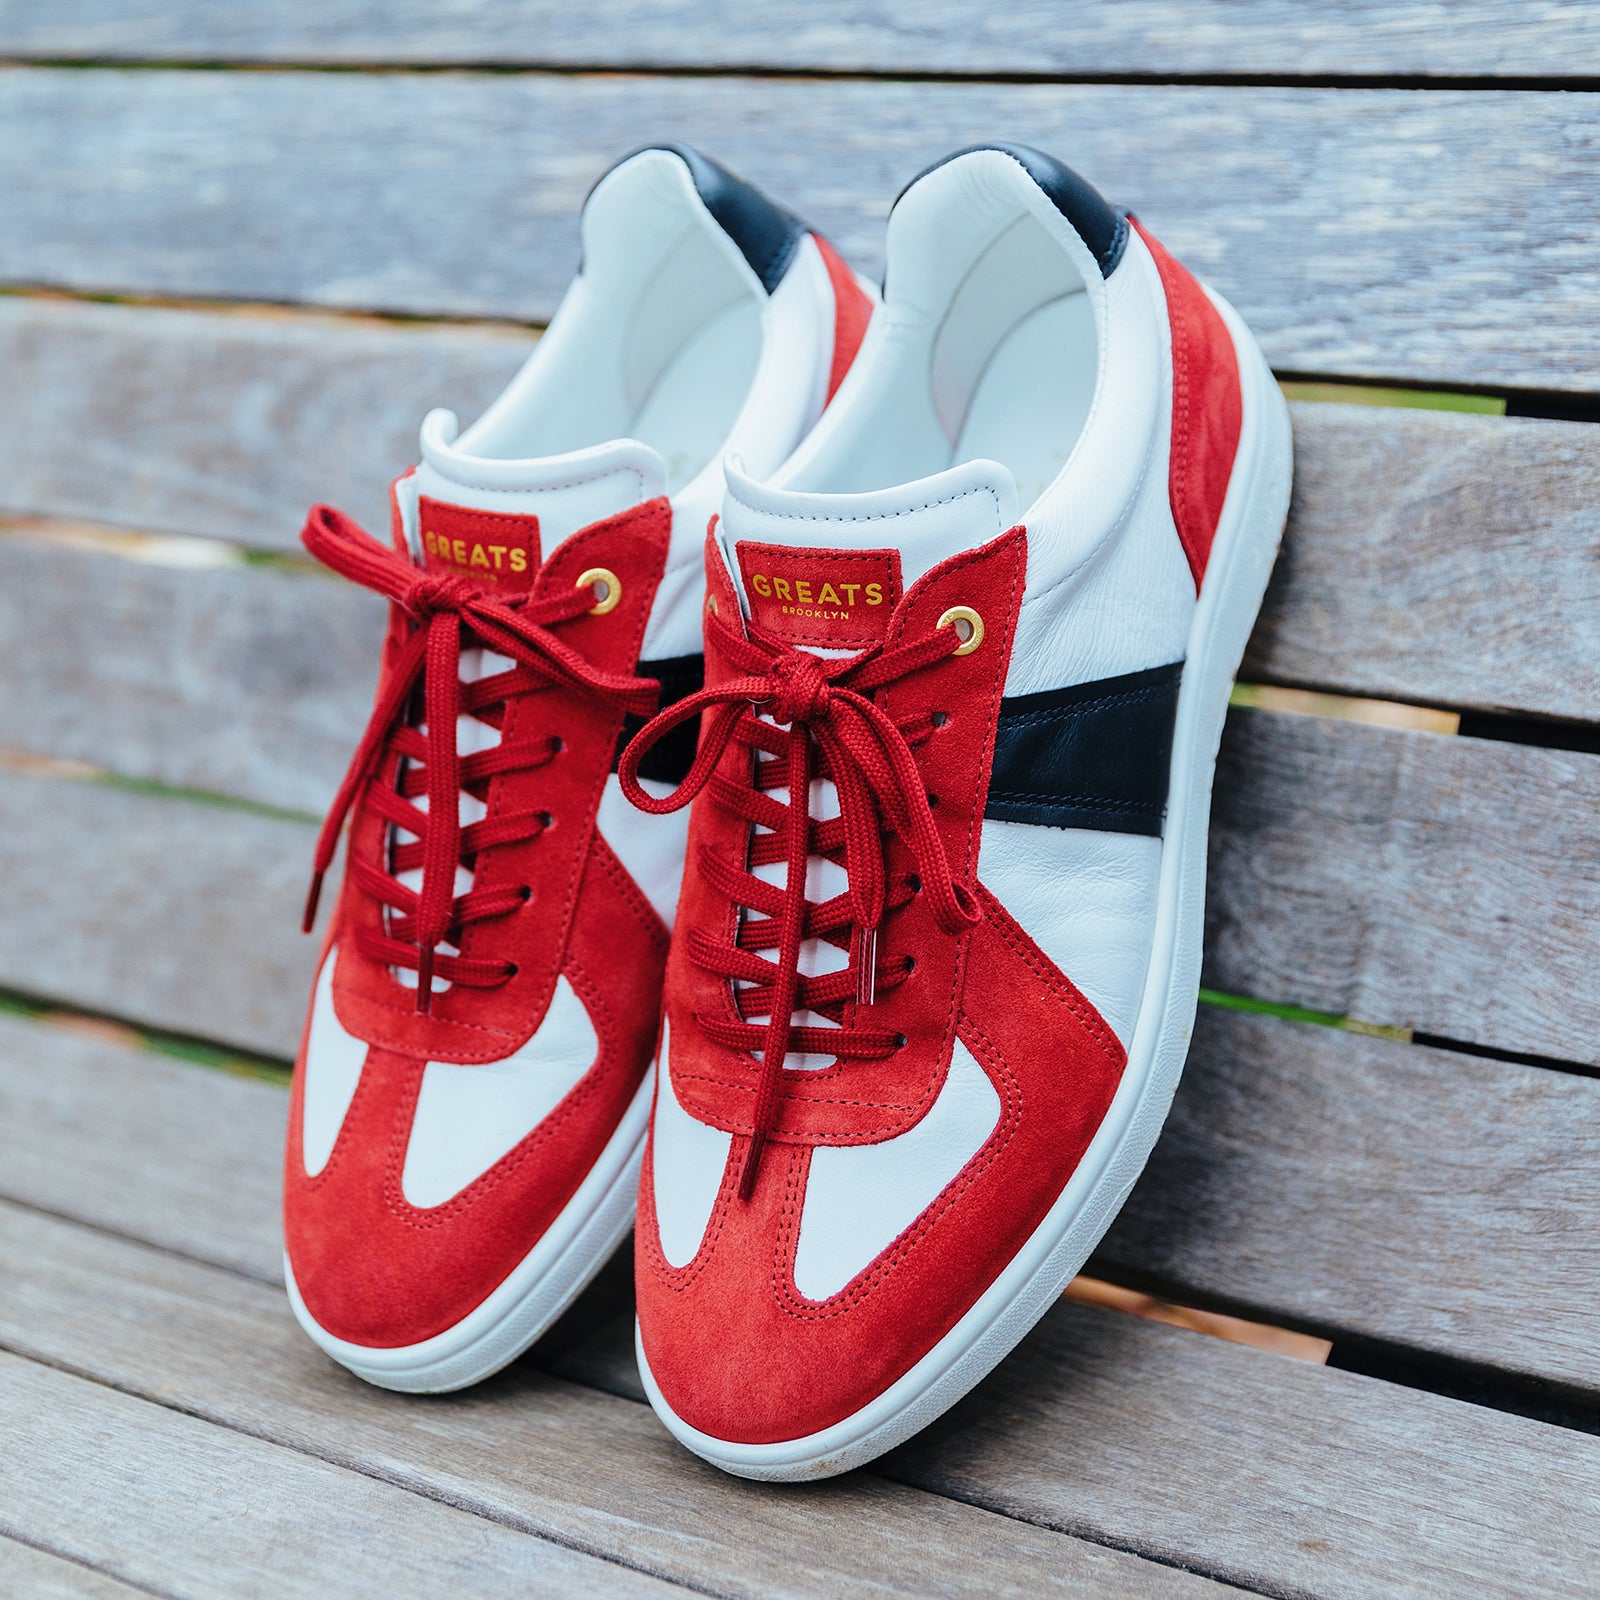 The GAT Sneaker - Red